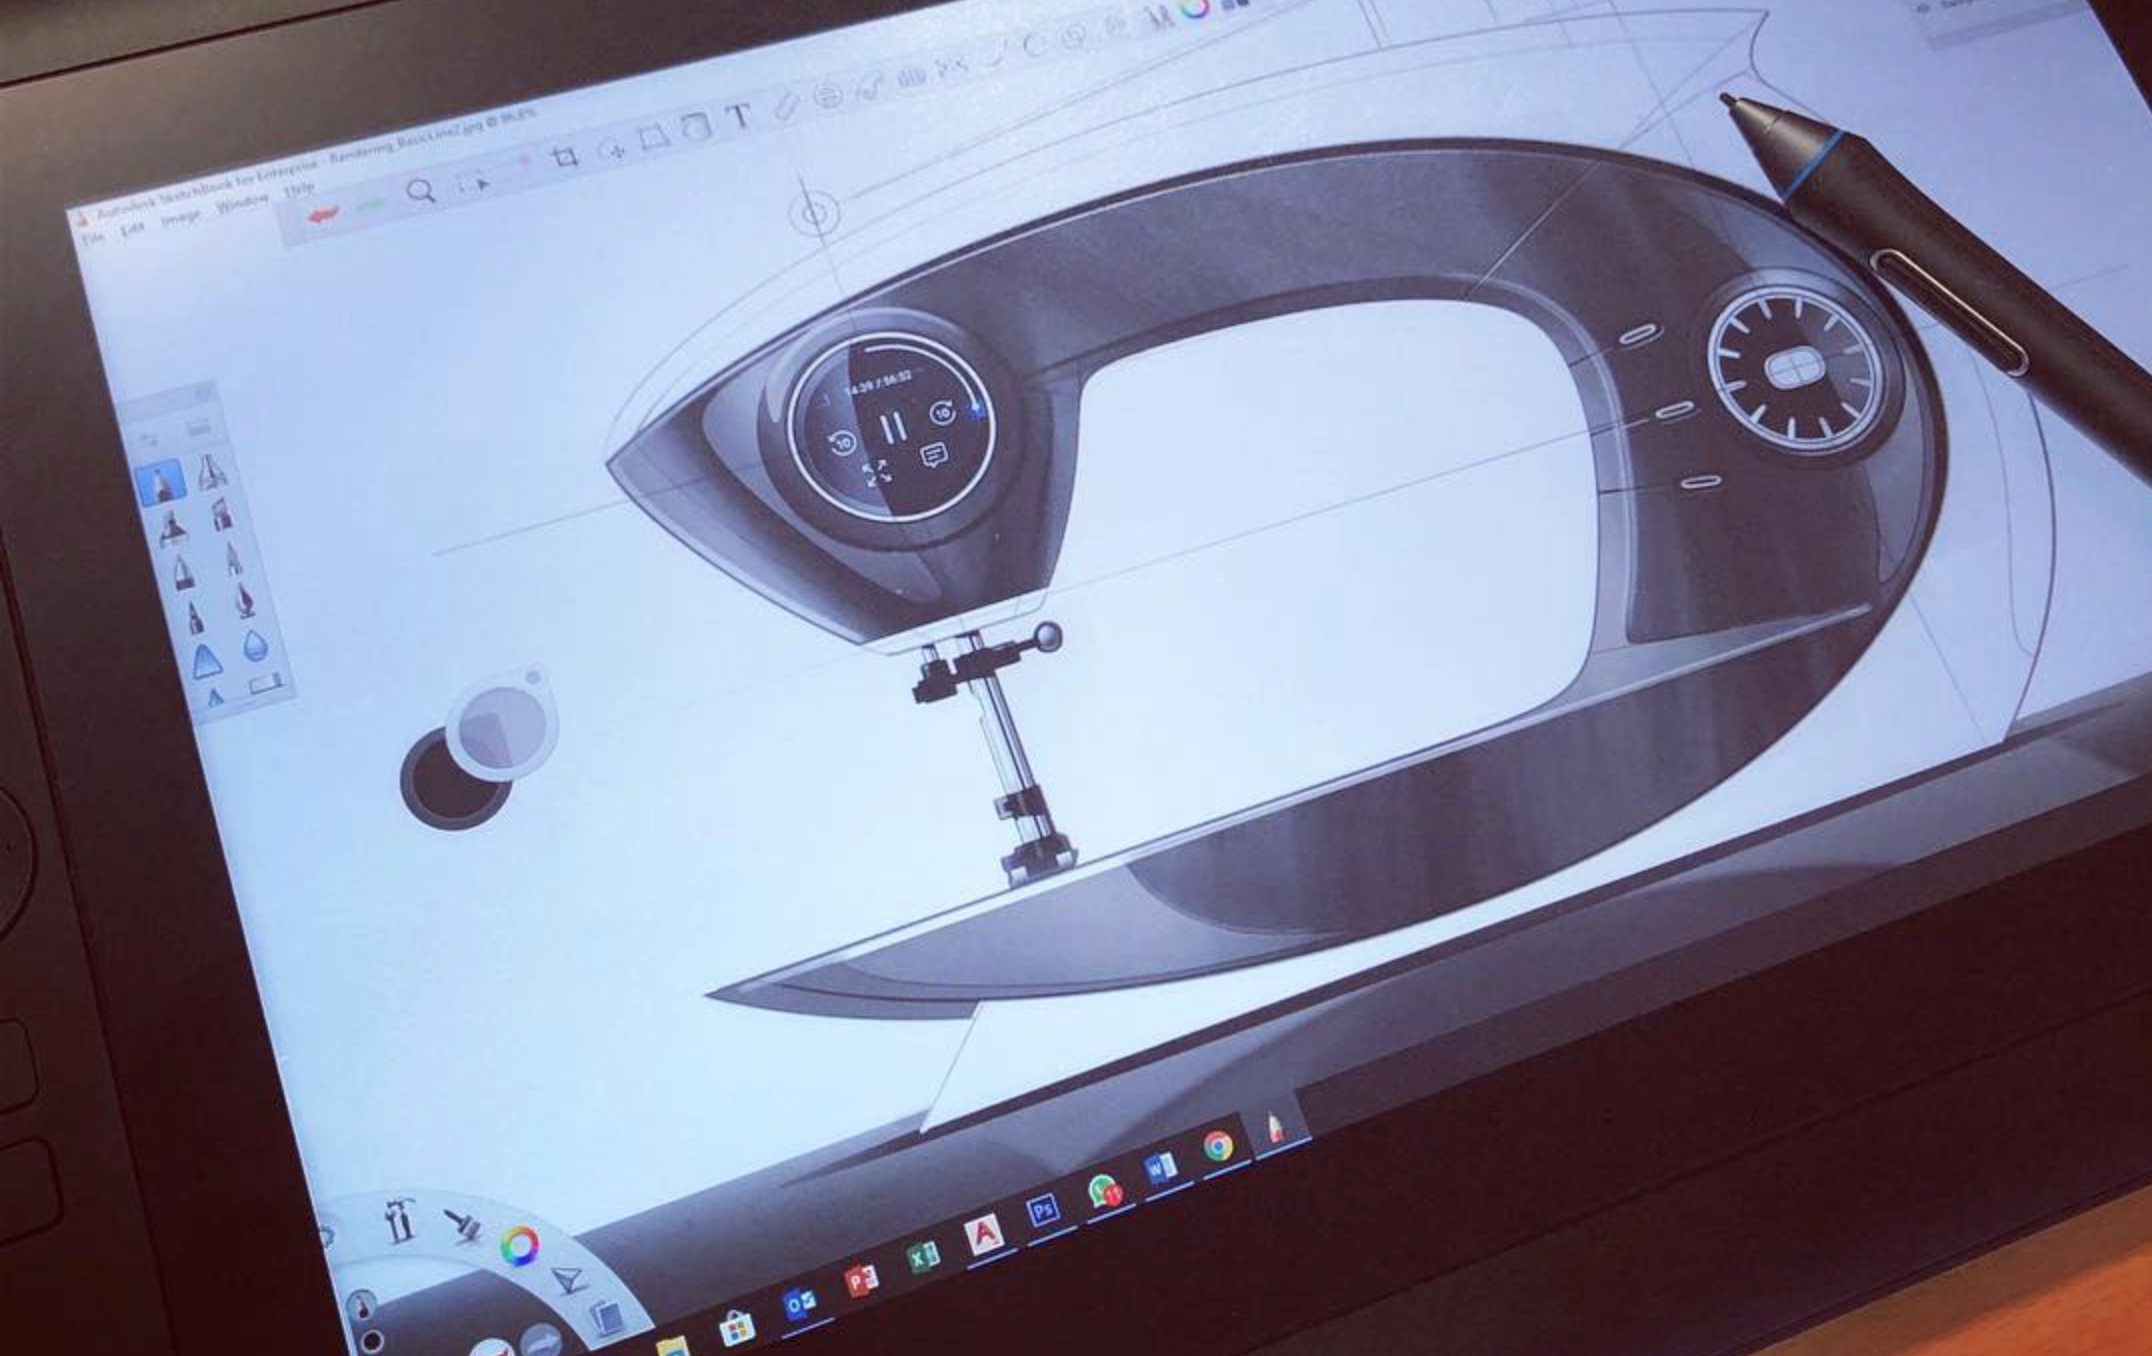 Industrial Design: From Sketch to Concept Model